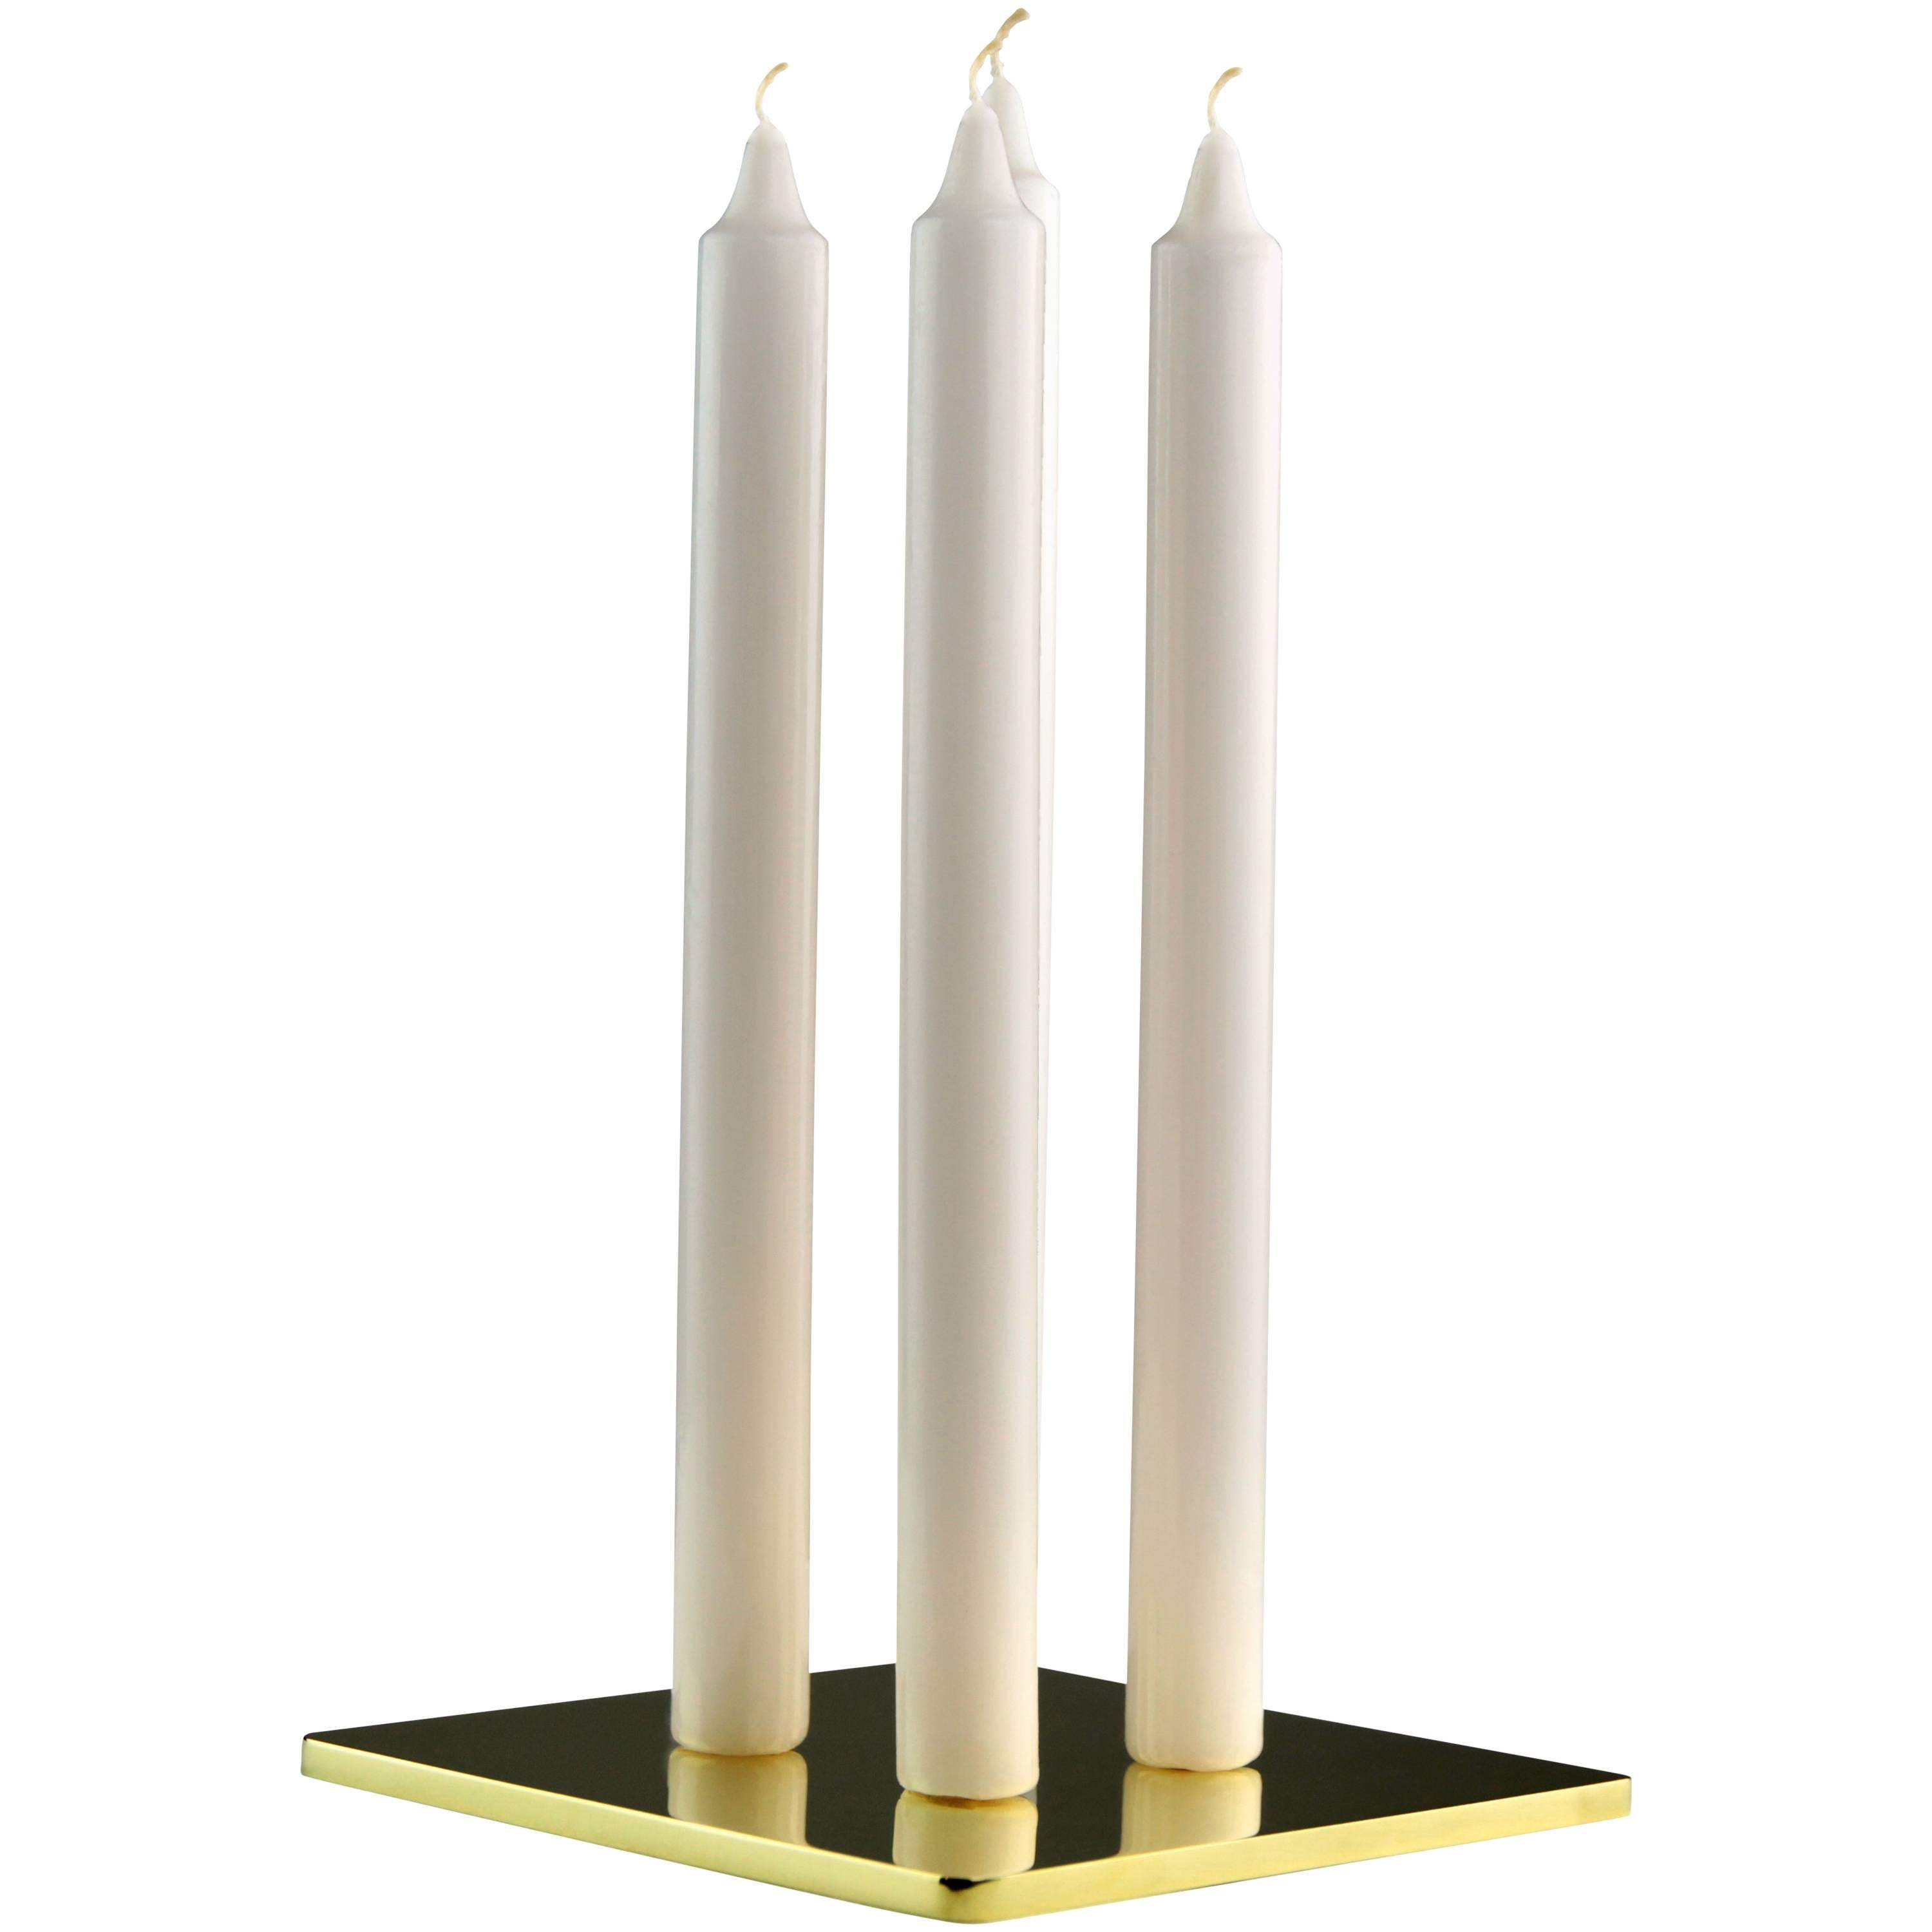 The Nordic Candleholder in High Polished Brass, Quadruple For Sale